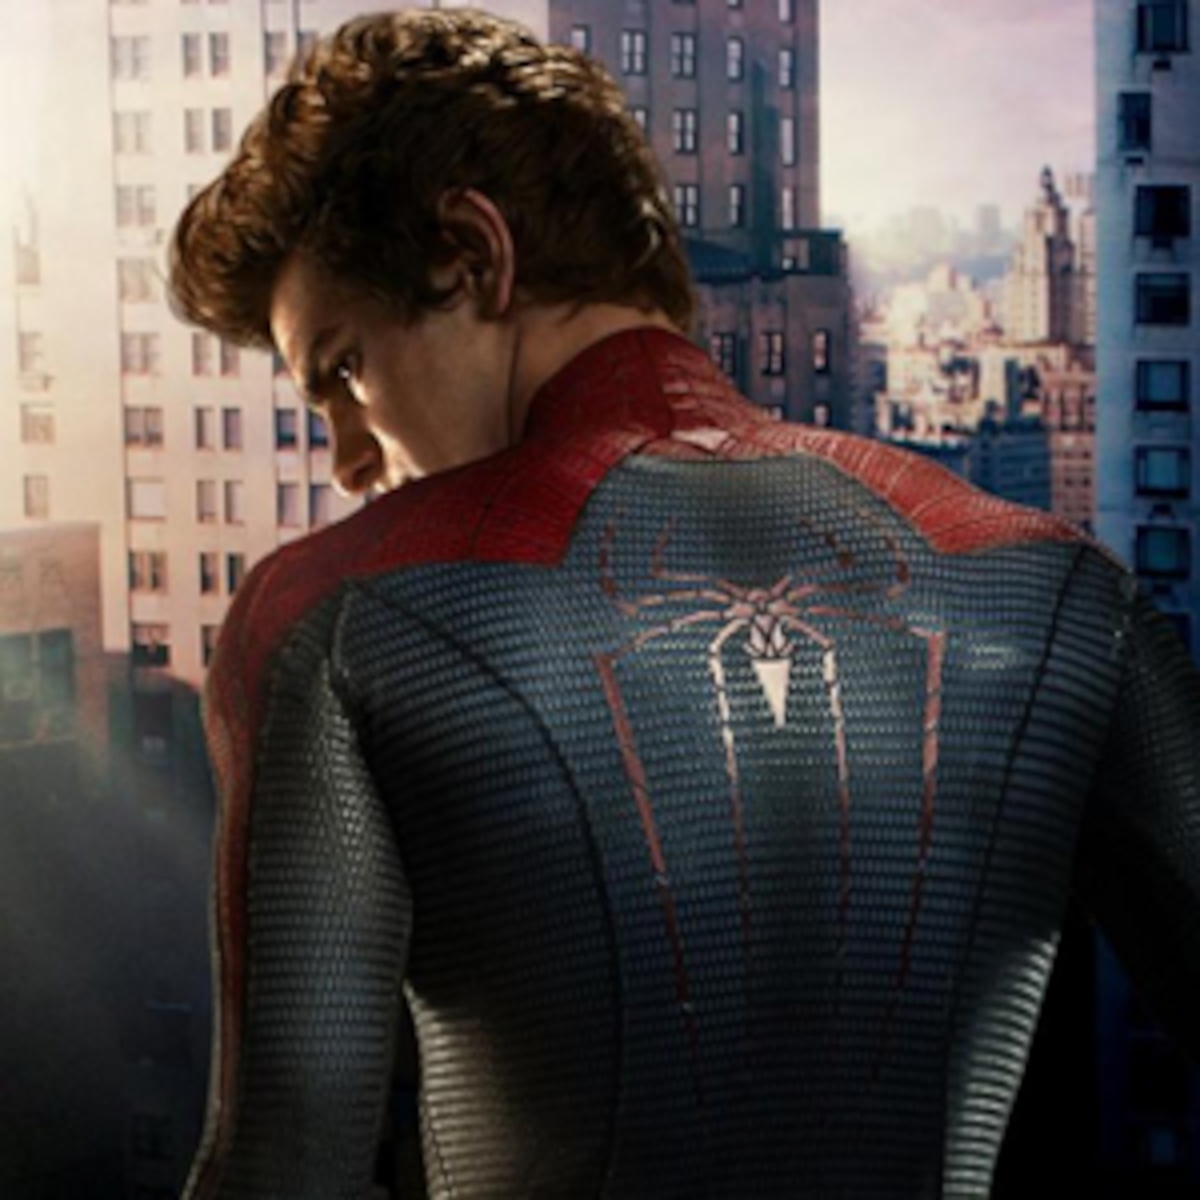 The Amazing Spider-Man might be the most realistic and human